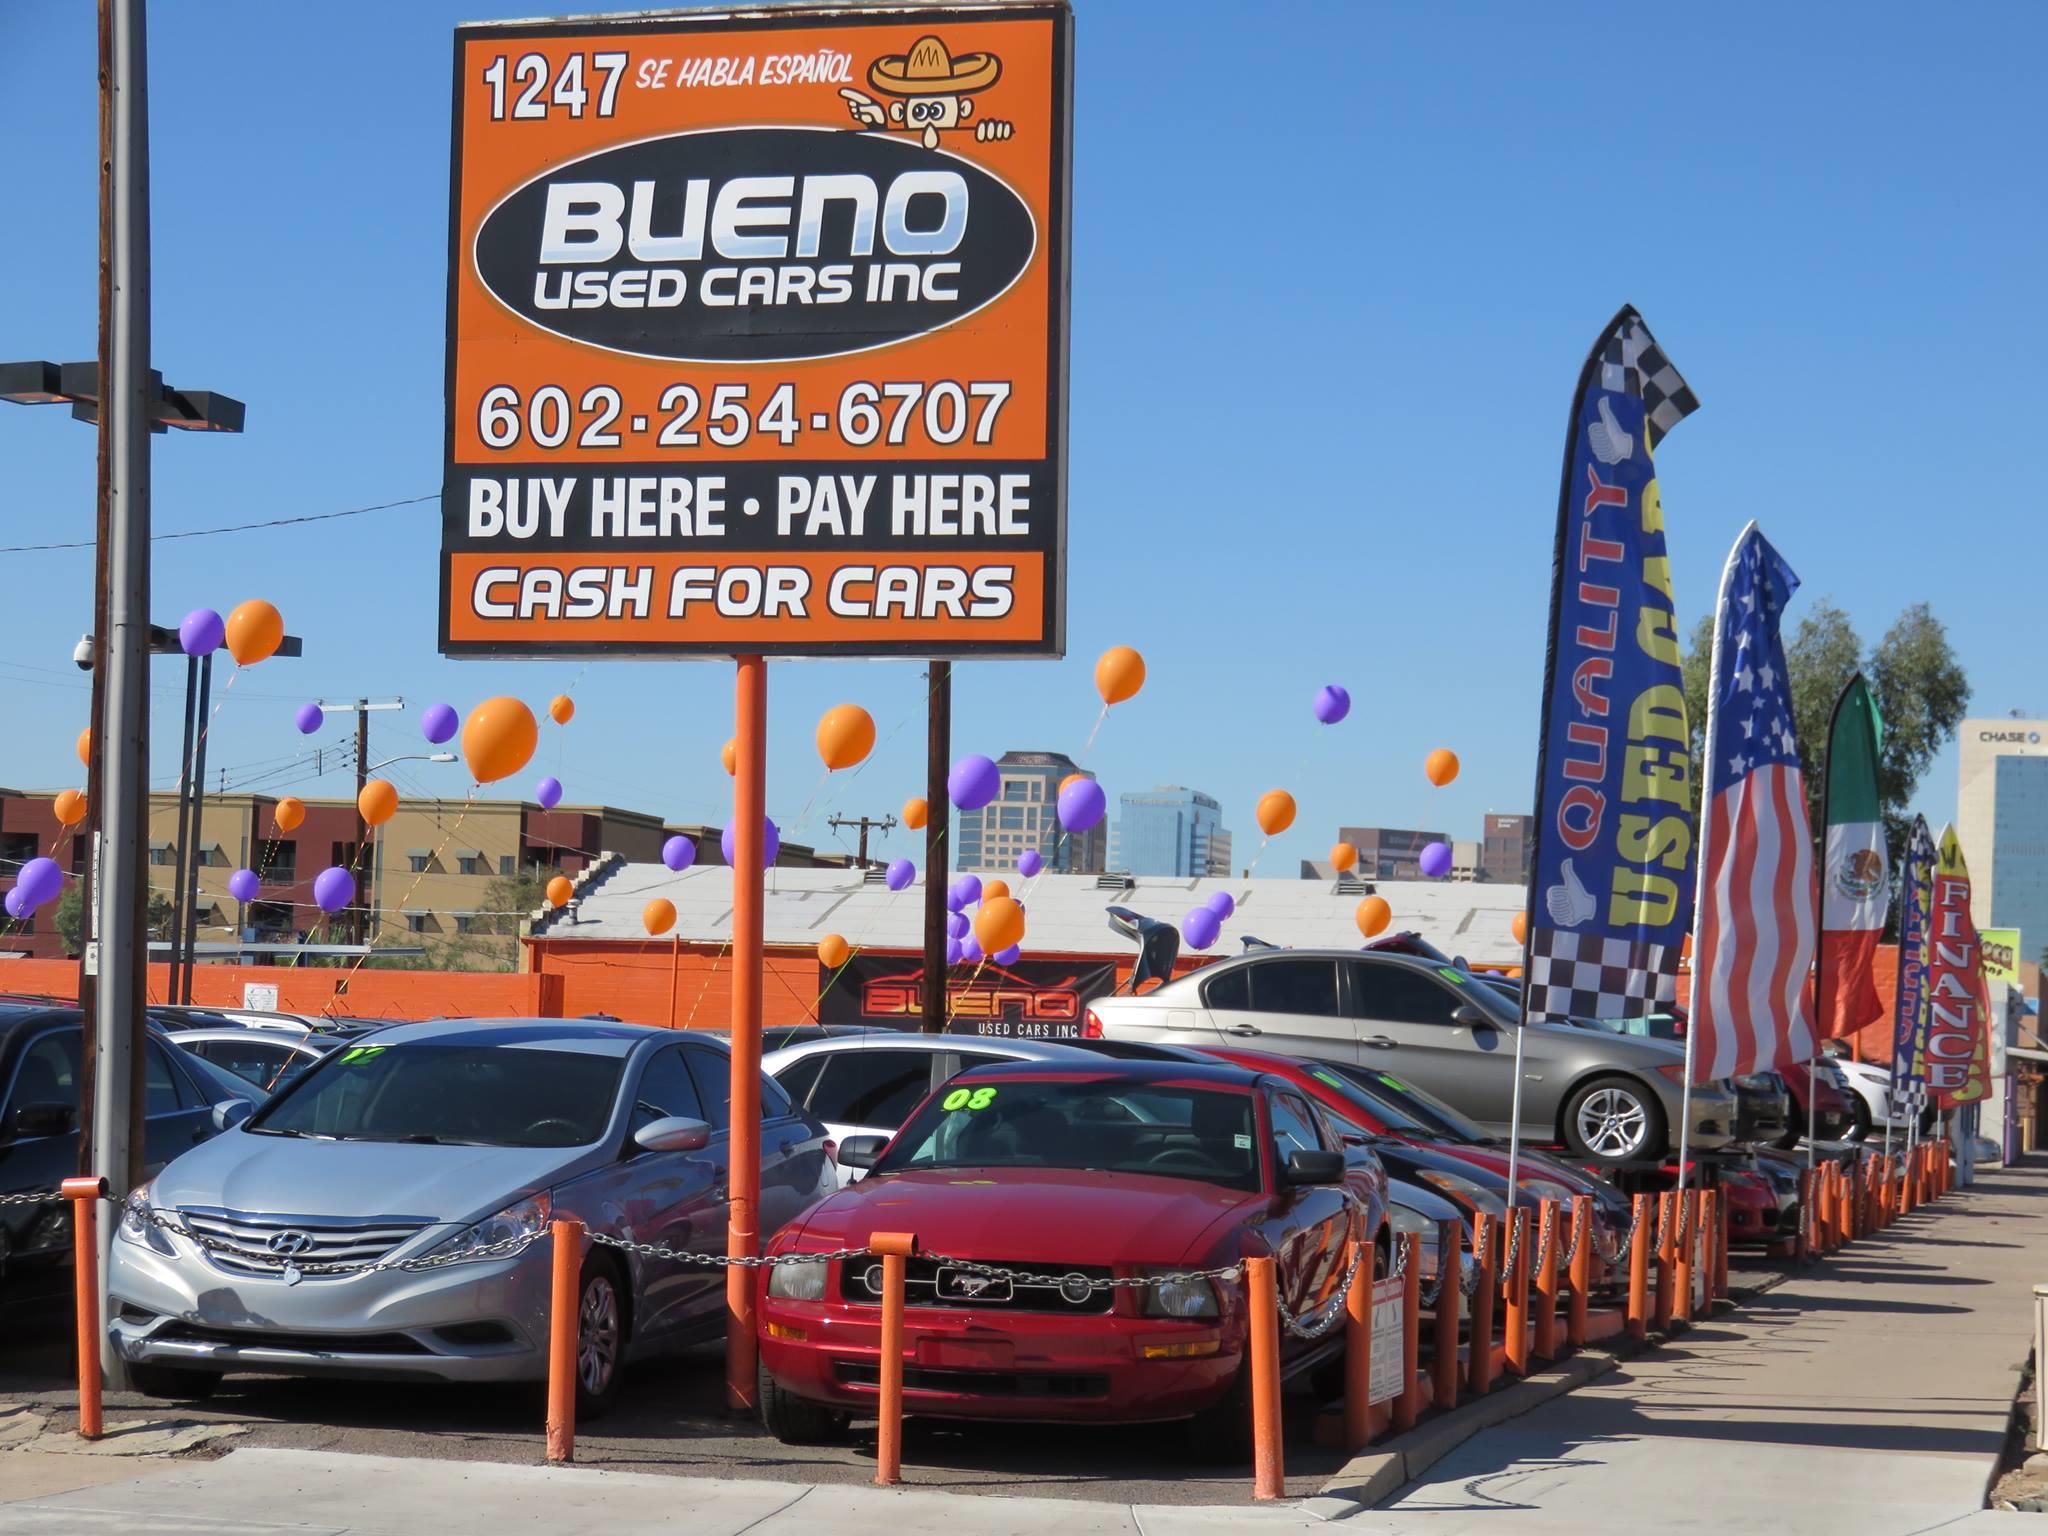 Used cars for sale buy here pay here. Car corner